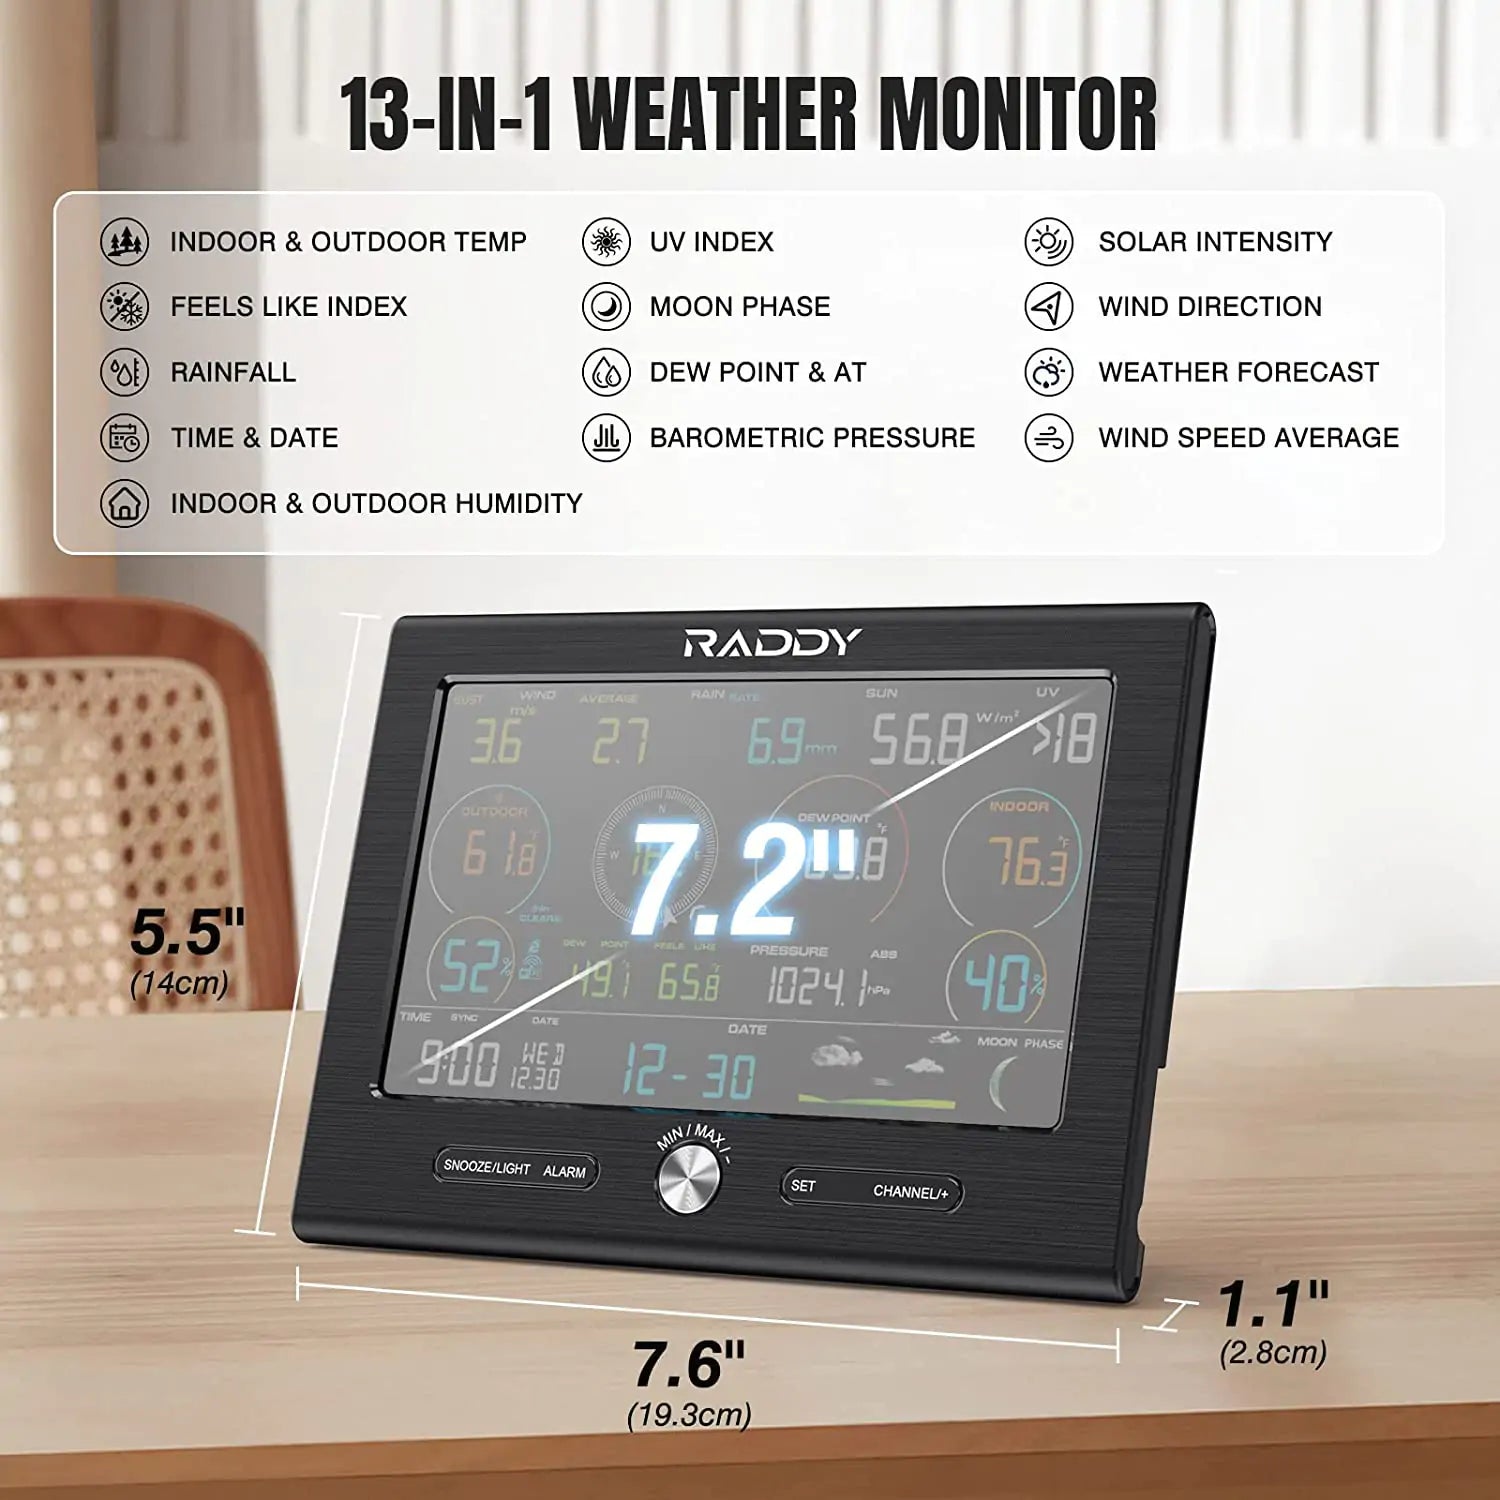 Raddy L7 LoRa Weather Station 1.9 Miles Long Range - Wireless Wi-Fi Indoor/Outdoor Weather Station with Rain Gauge, Thermometer, Humidity Sensor for G